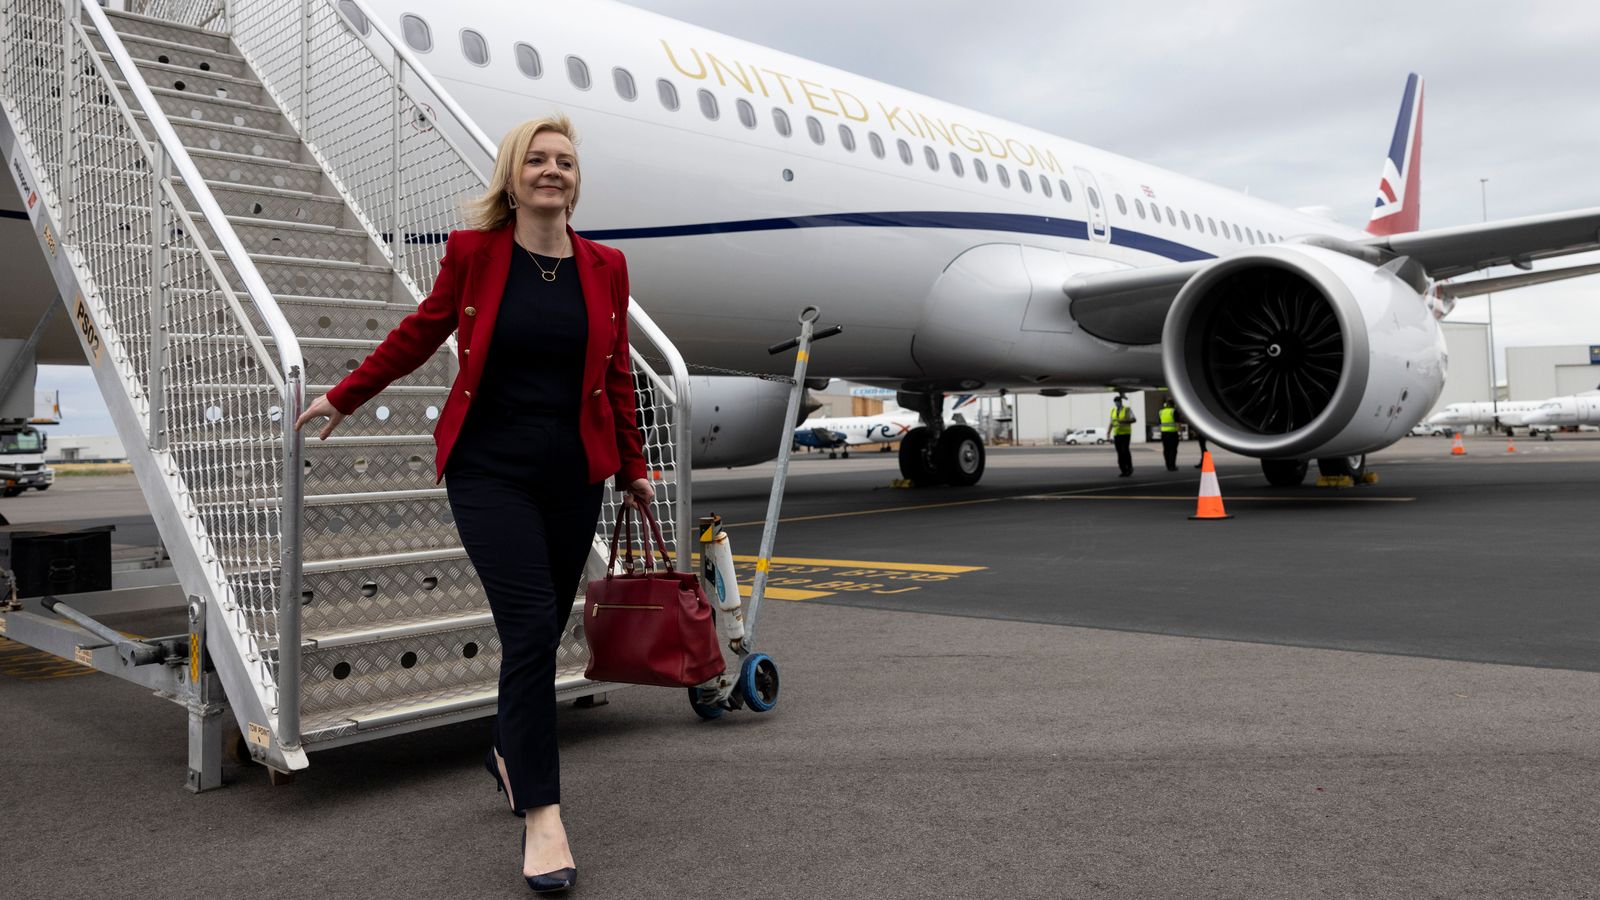 Labour criticise reports Liz Truss charted private jet for trip to Australia which 'cost taxpayers £500,000'